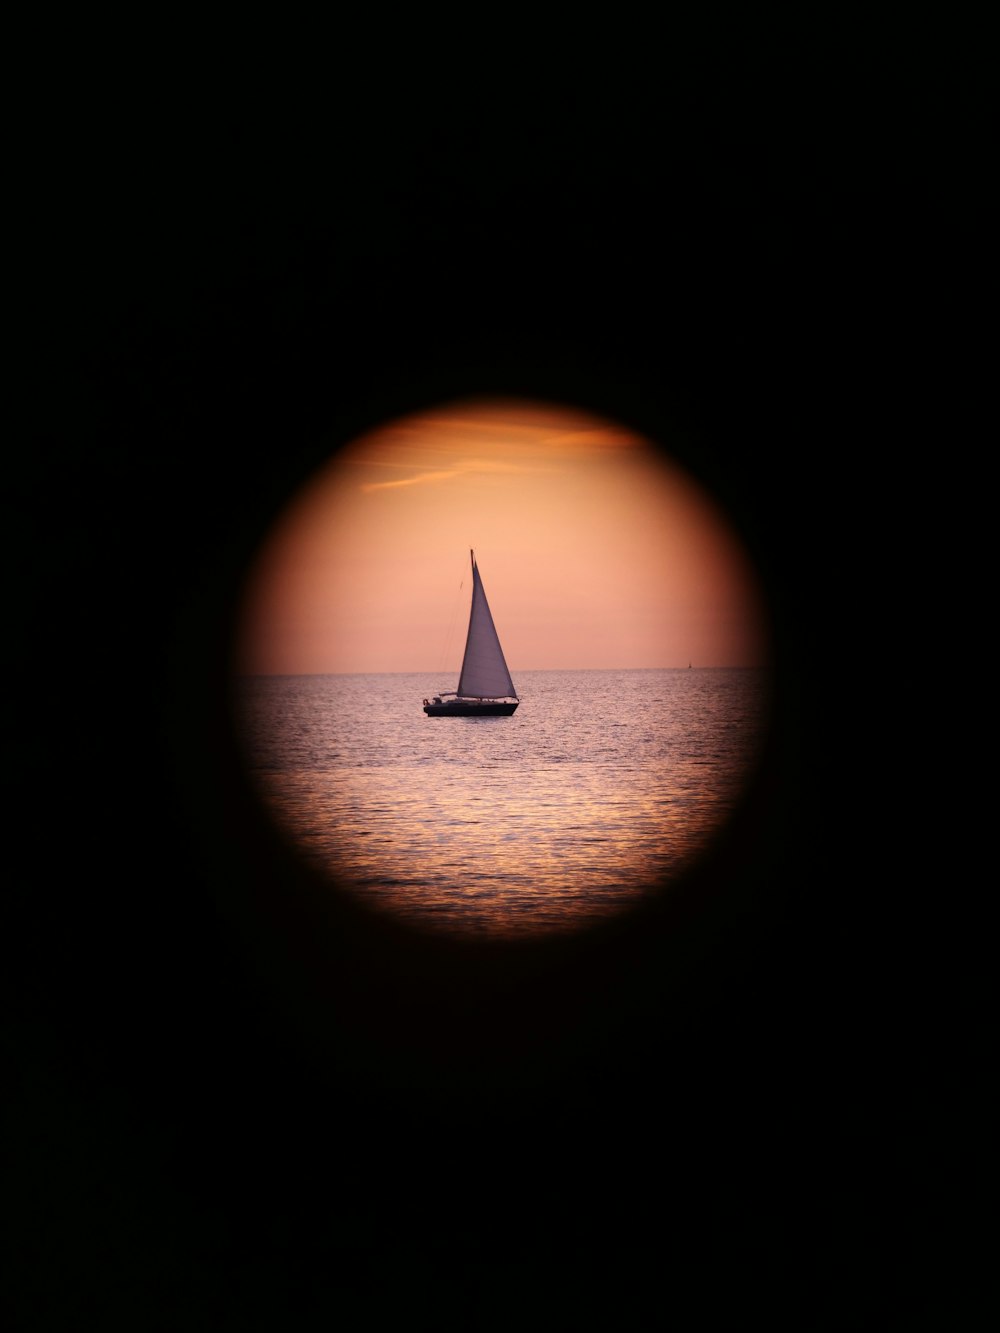 a sailboat is seen through a hole in the water